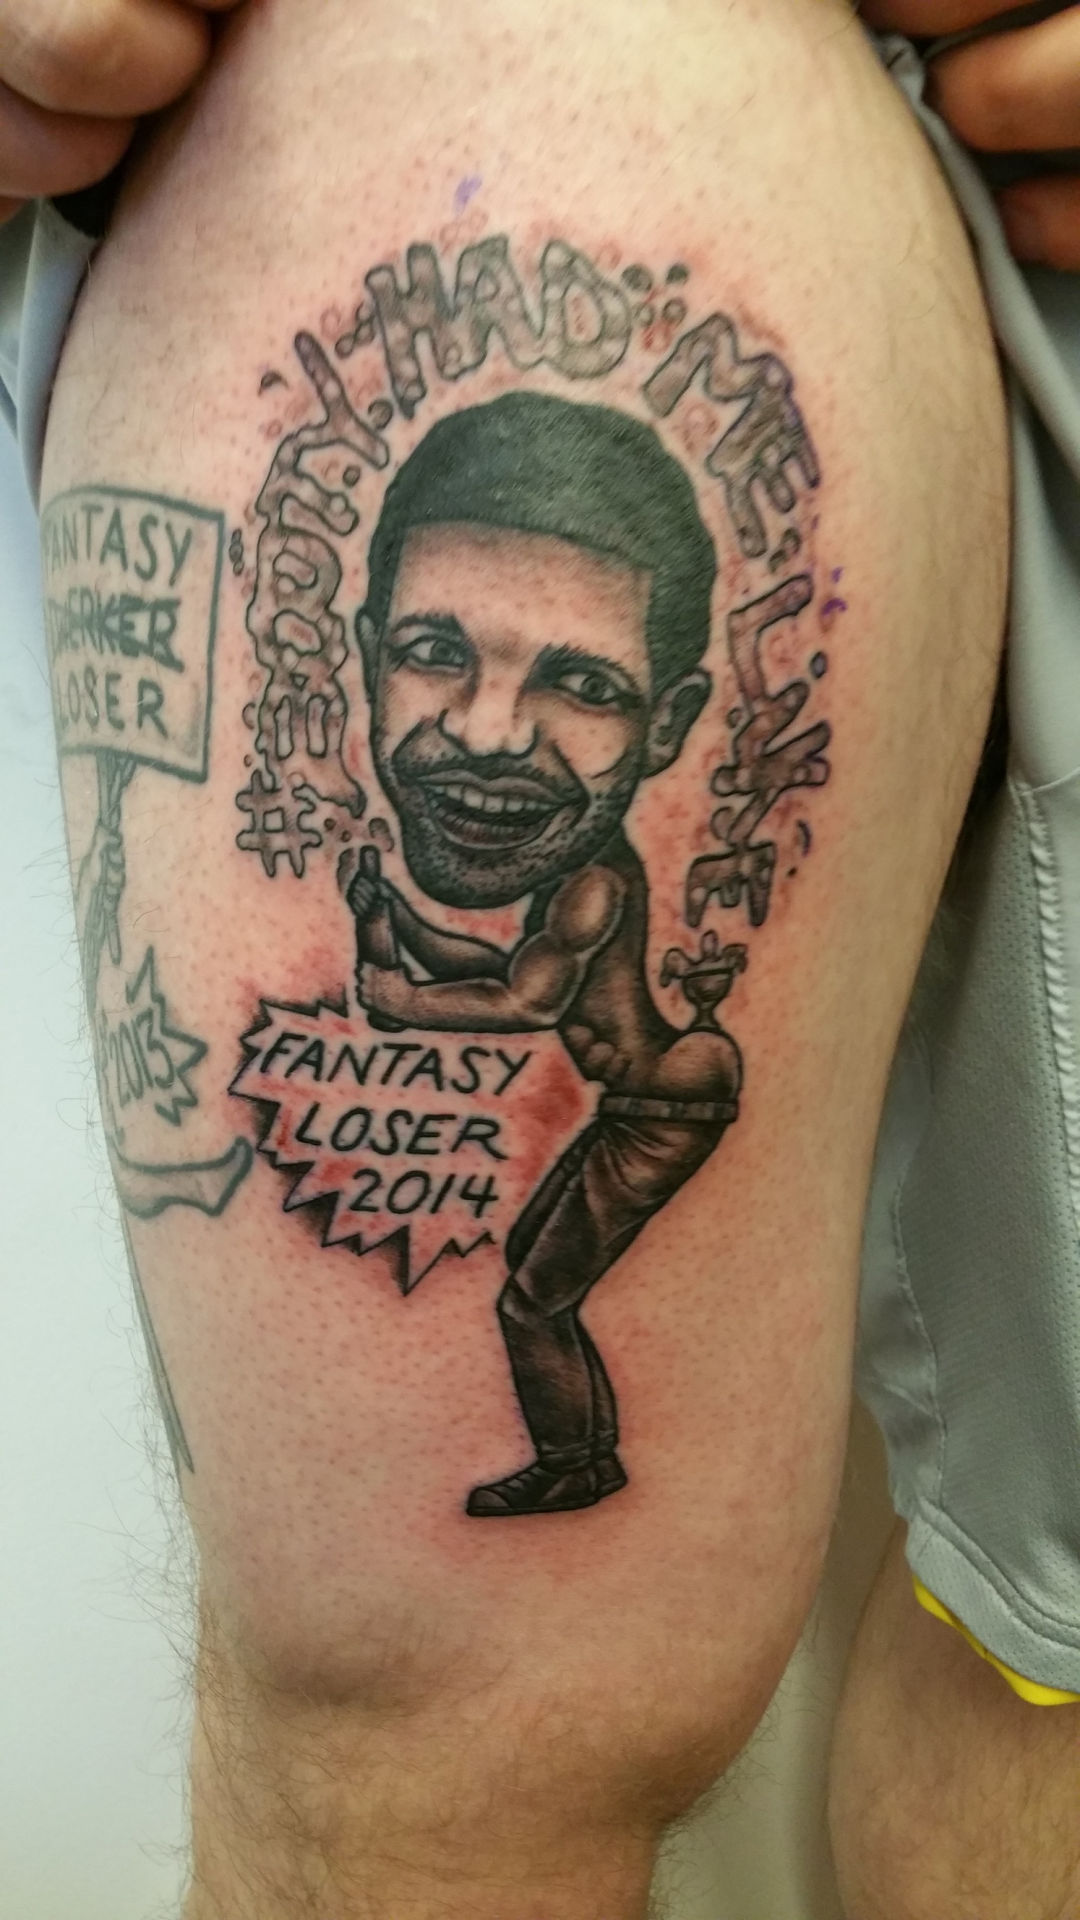 In this fantasy football league bros give each other the worst tattoos   The Daily Dot